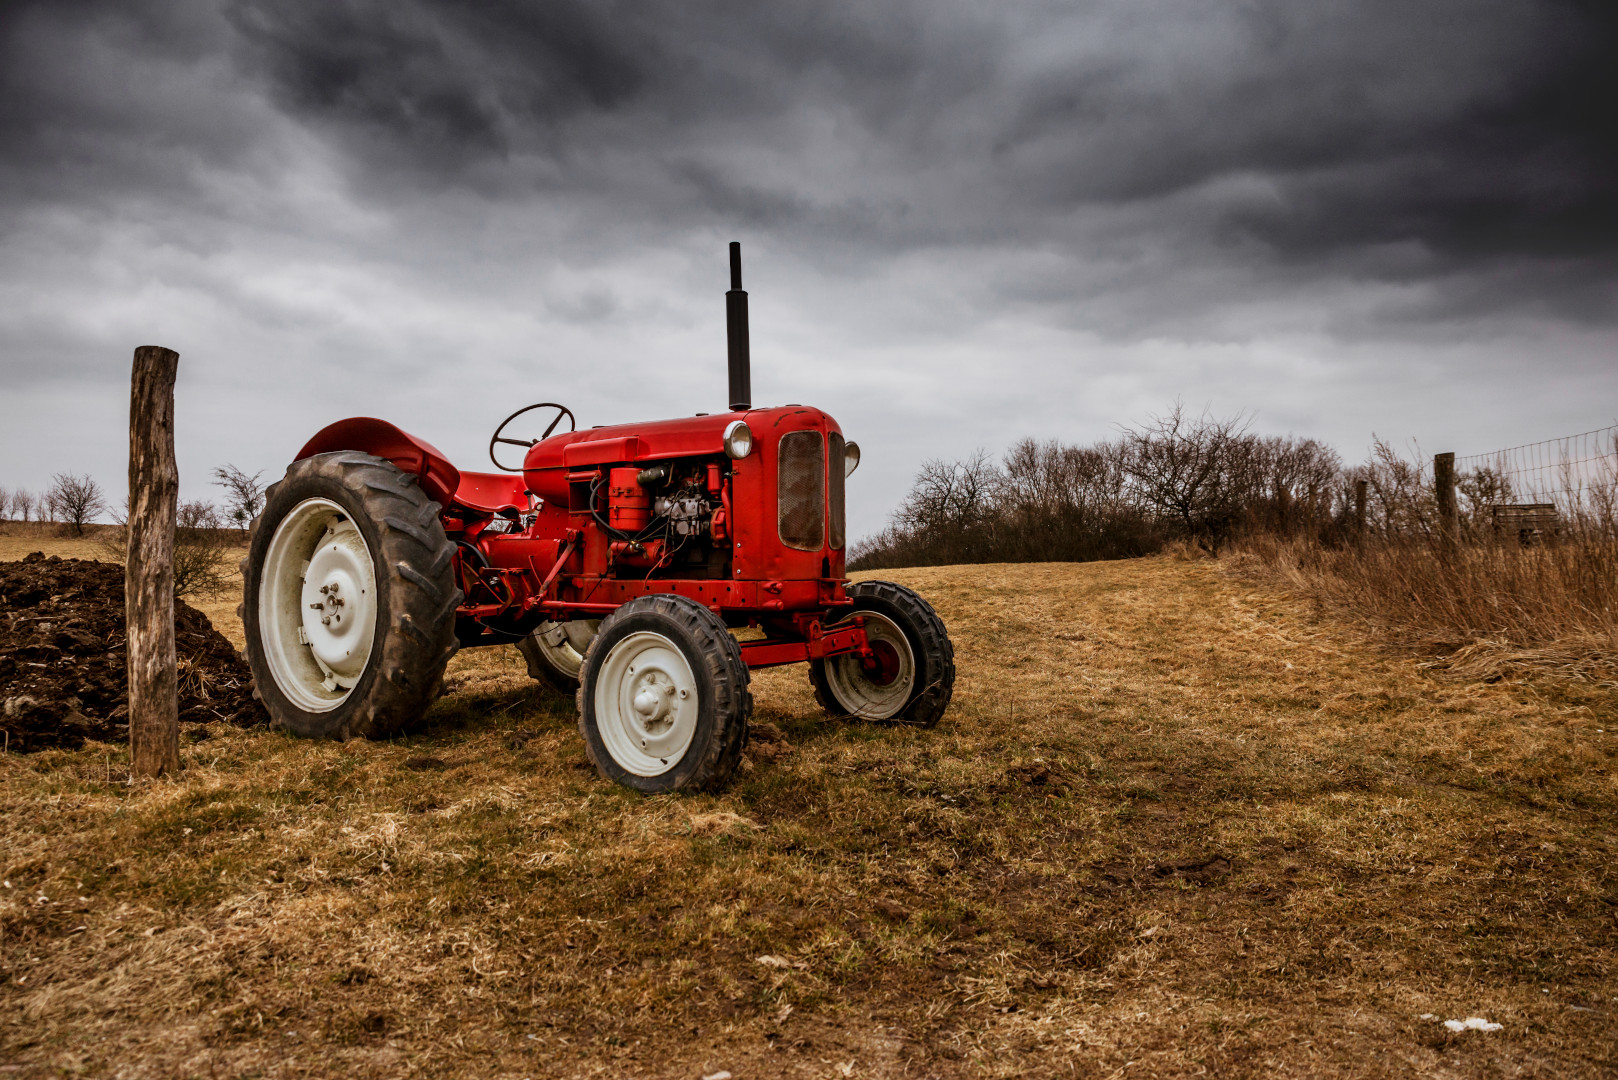 Theresa Sylvester's Published Stories - The Tractor